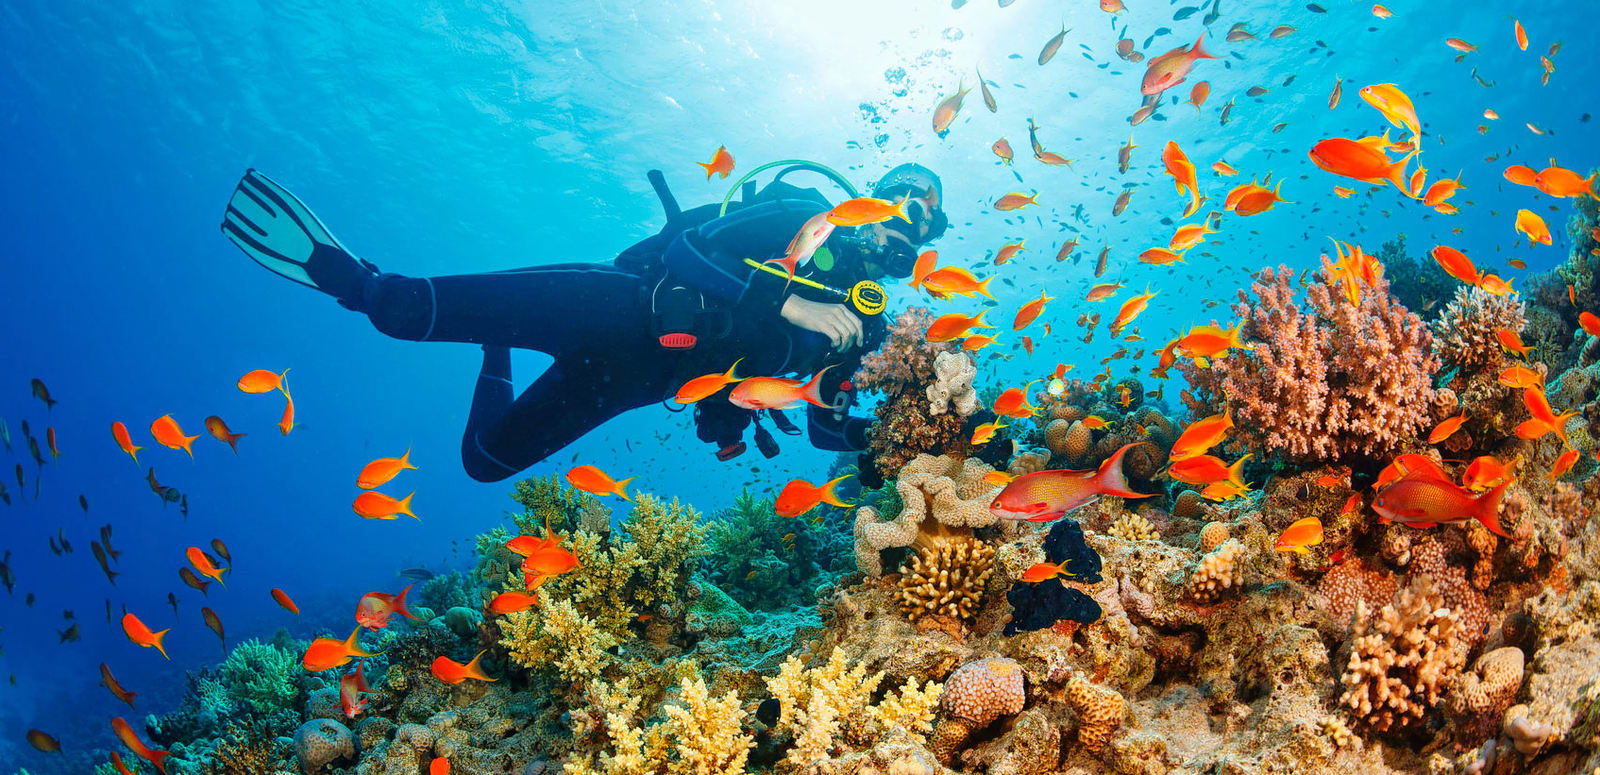 What to expect on your first scuba diving adventure?